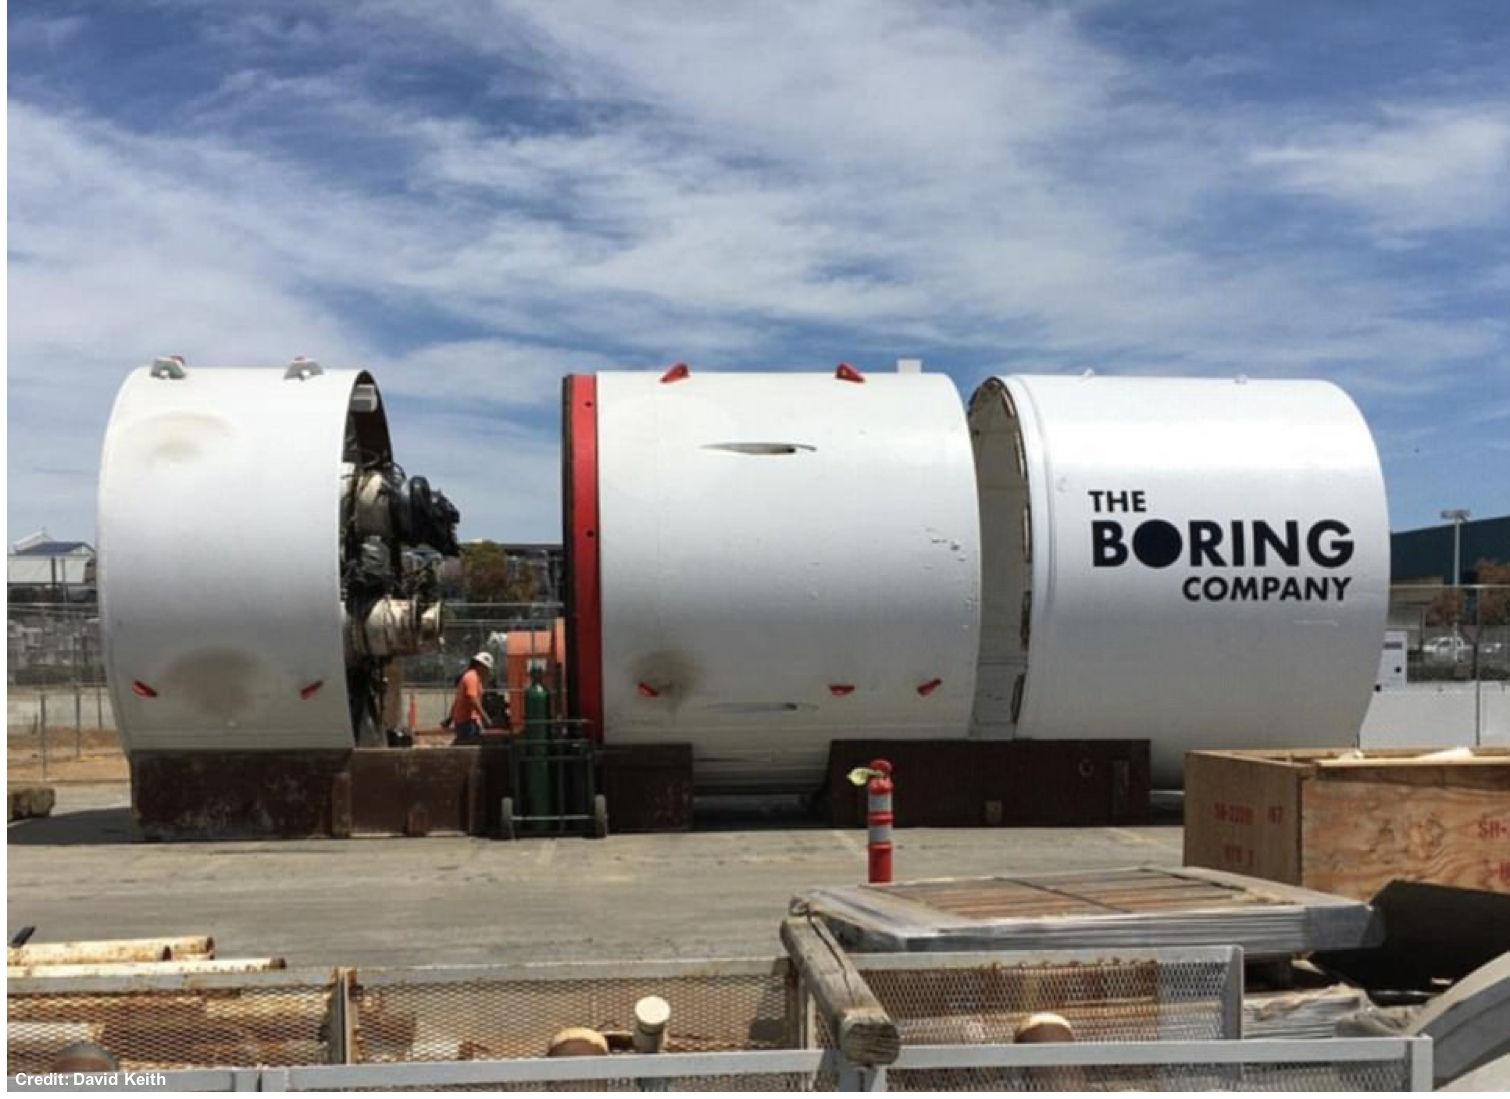 Elon Musk’s Boring Company is setting up operations in Austin